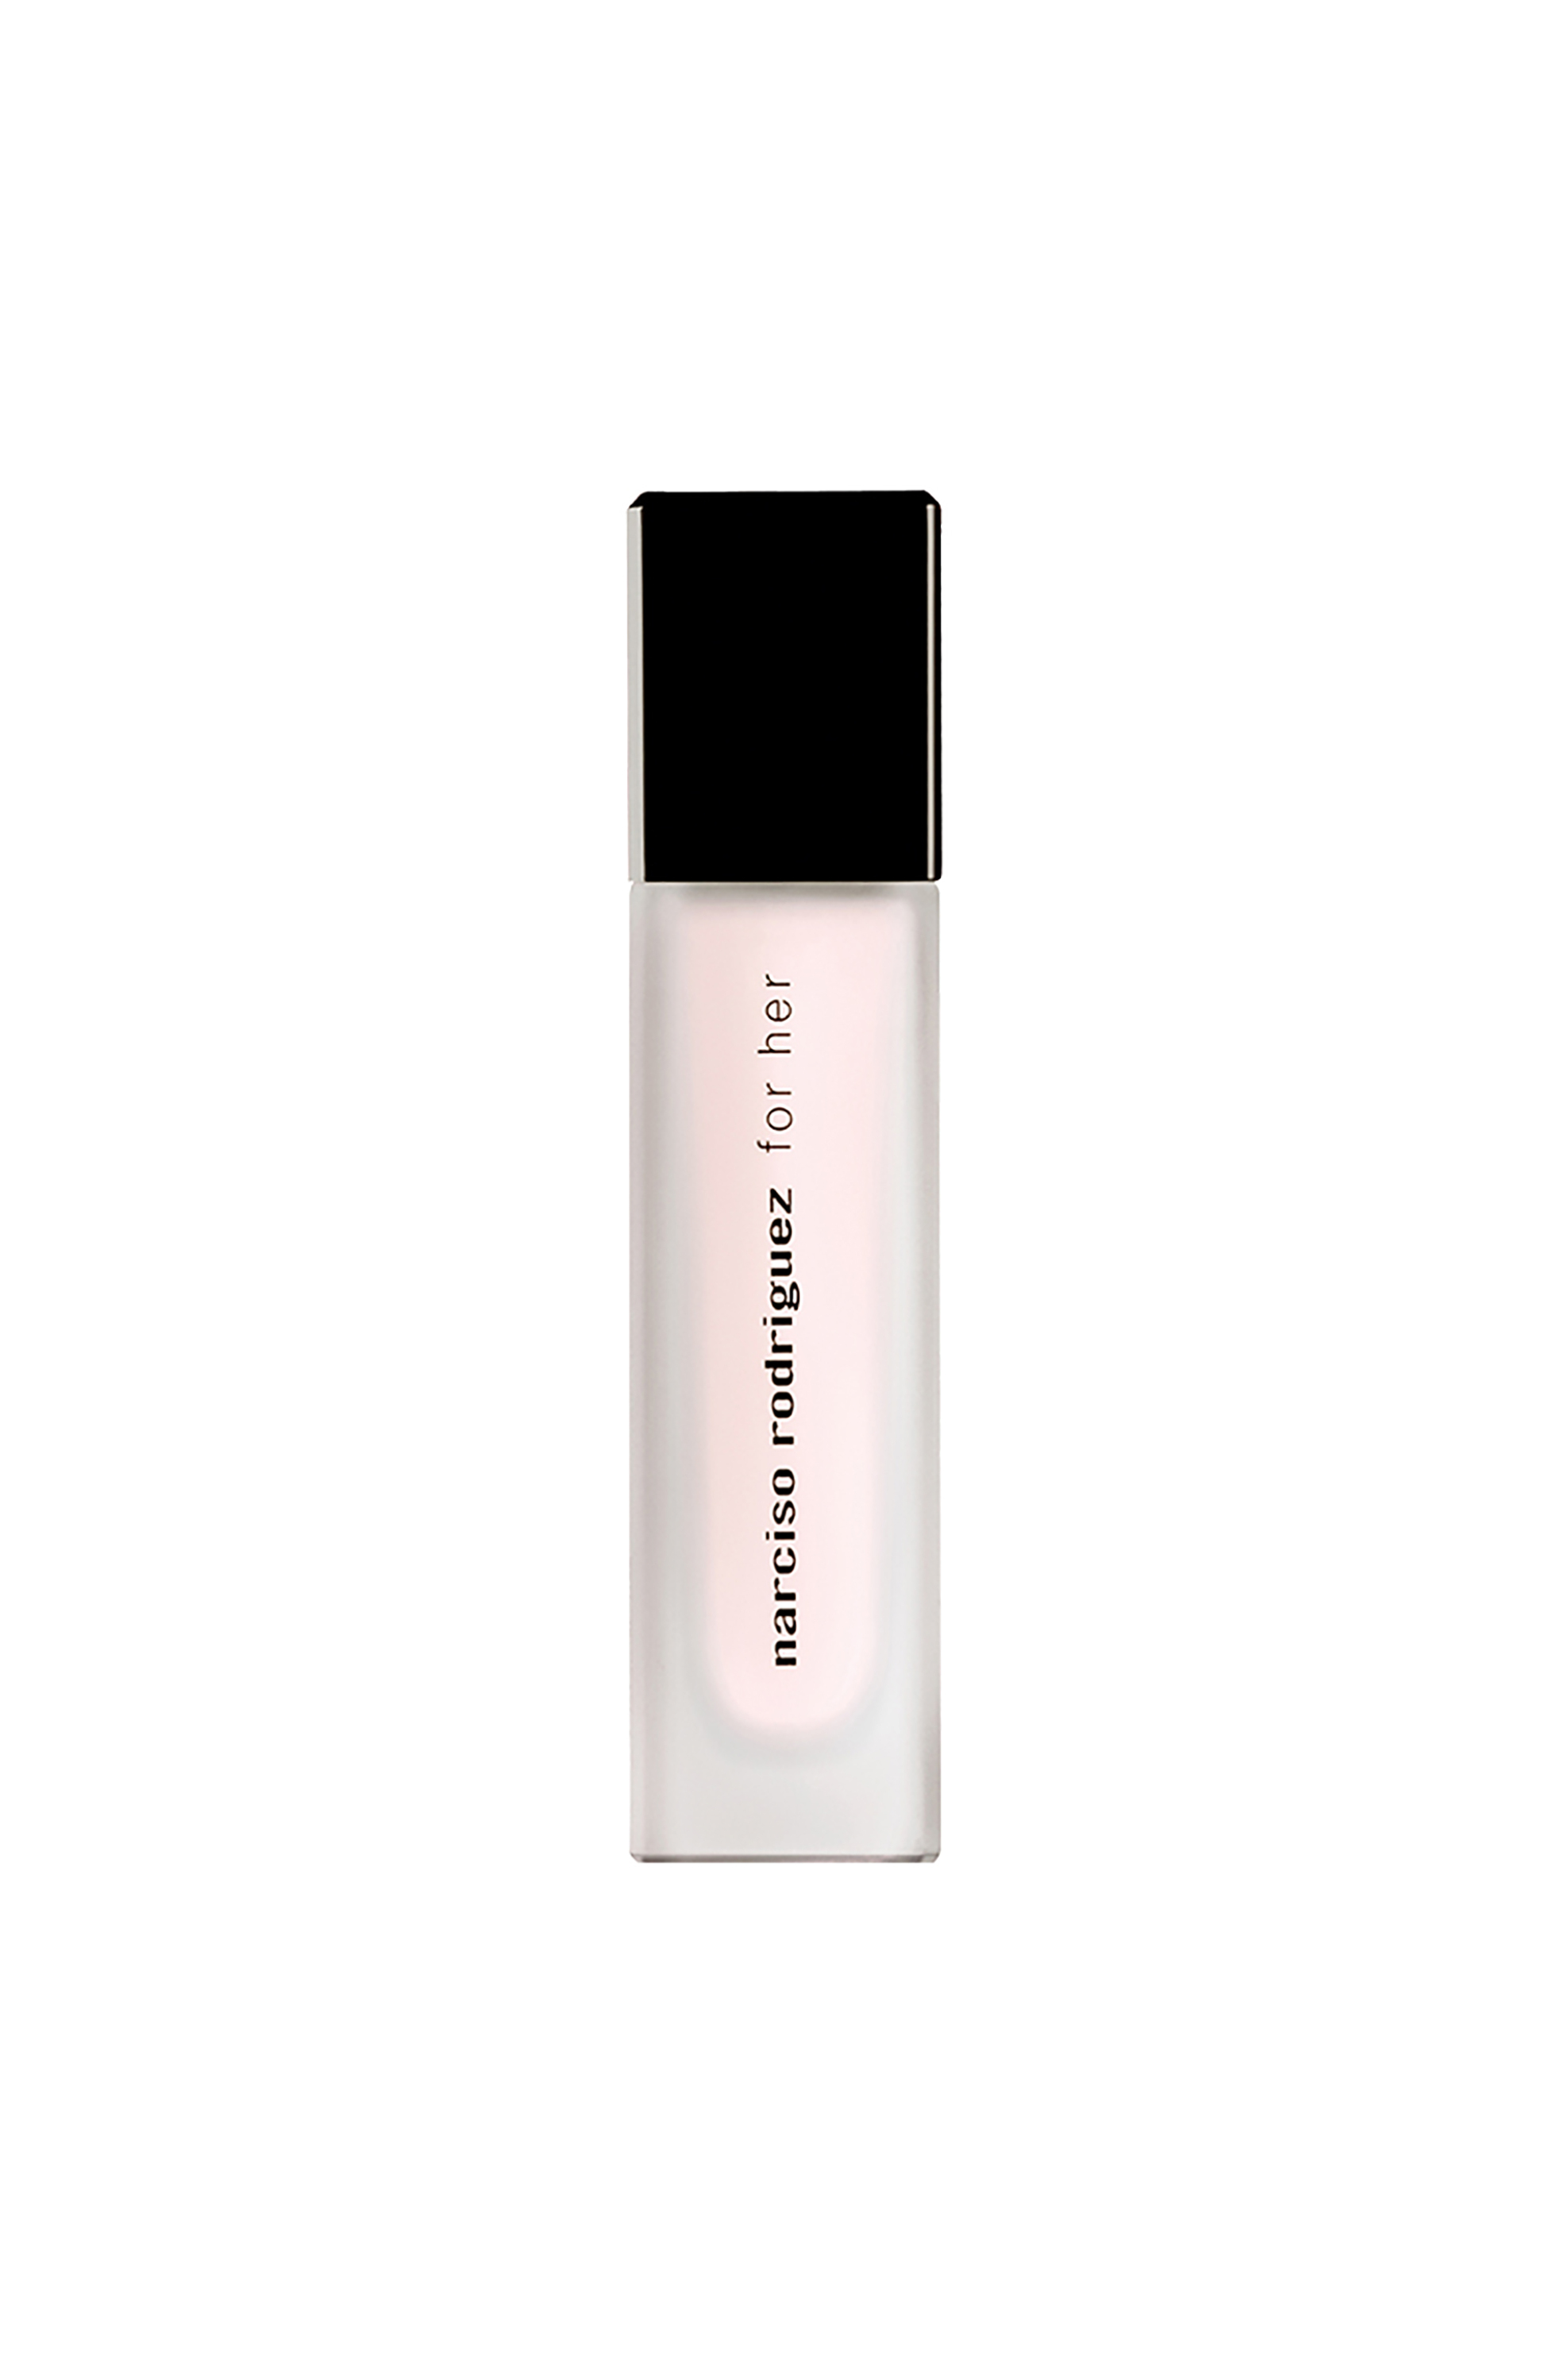 Narciso Rodriguez For Her Hair Mist Spray 30 ml - 8902250 1031184